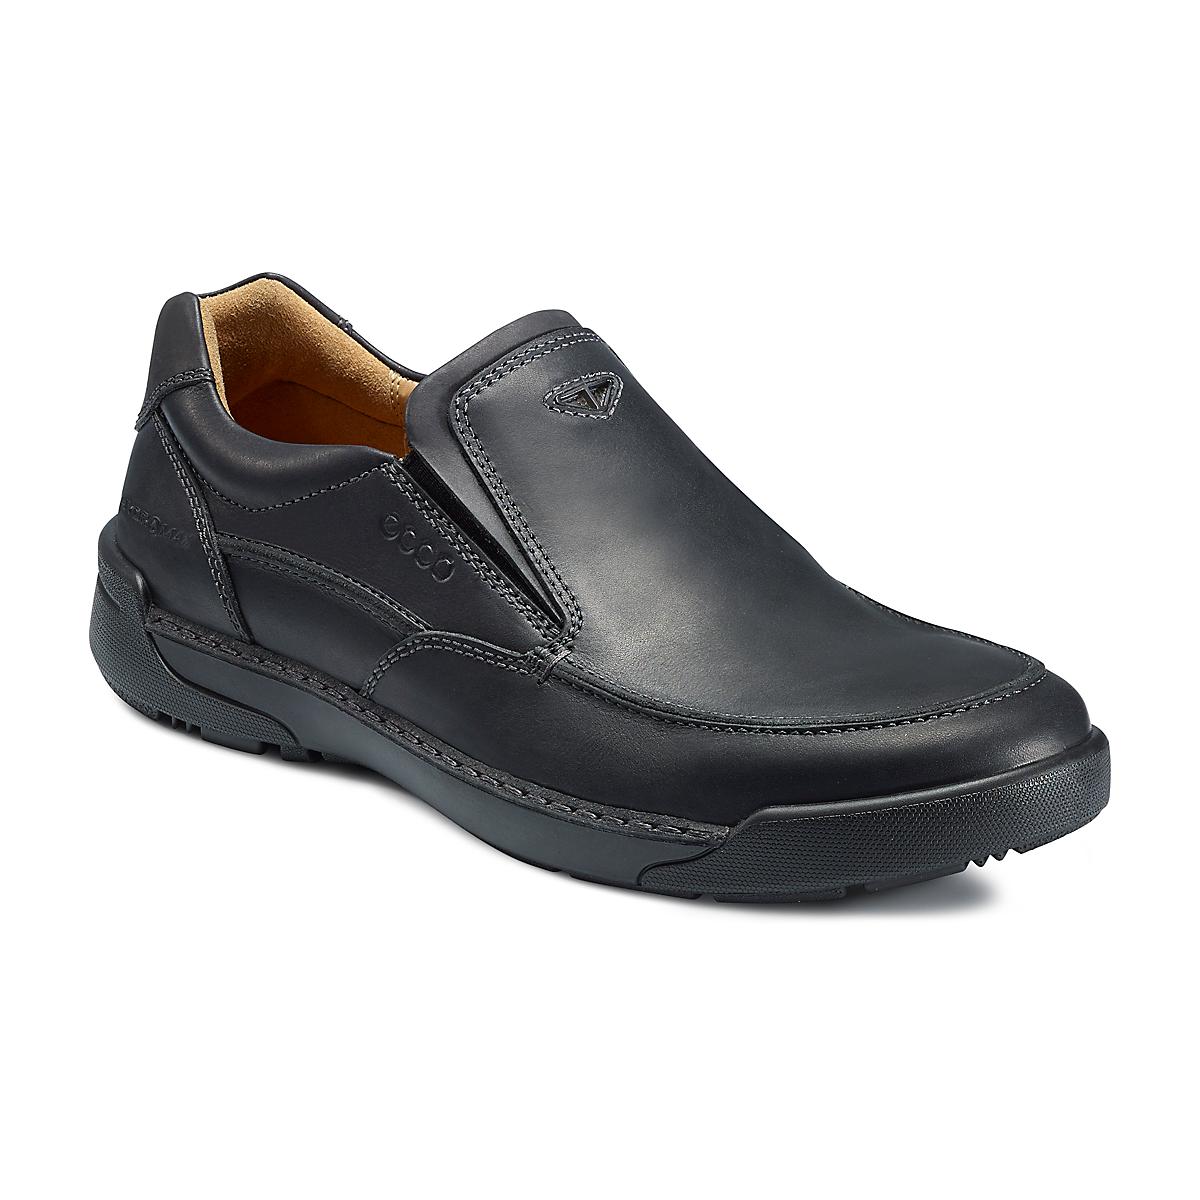 Mens Ecco USA Fusion Casual Slip On Casual Shoe at Road Runner Sports